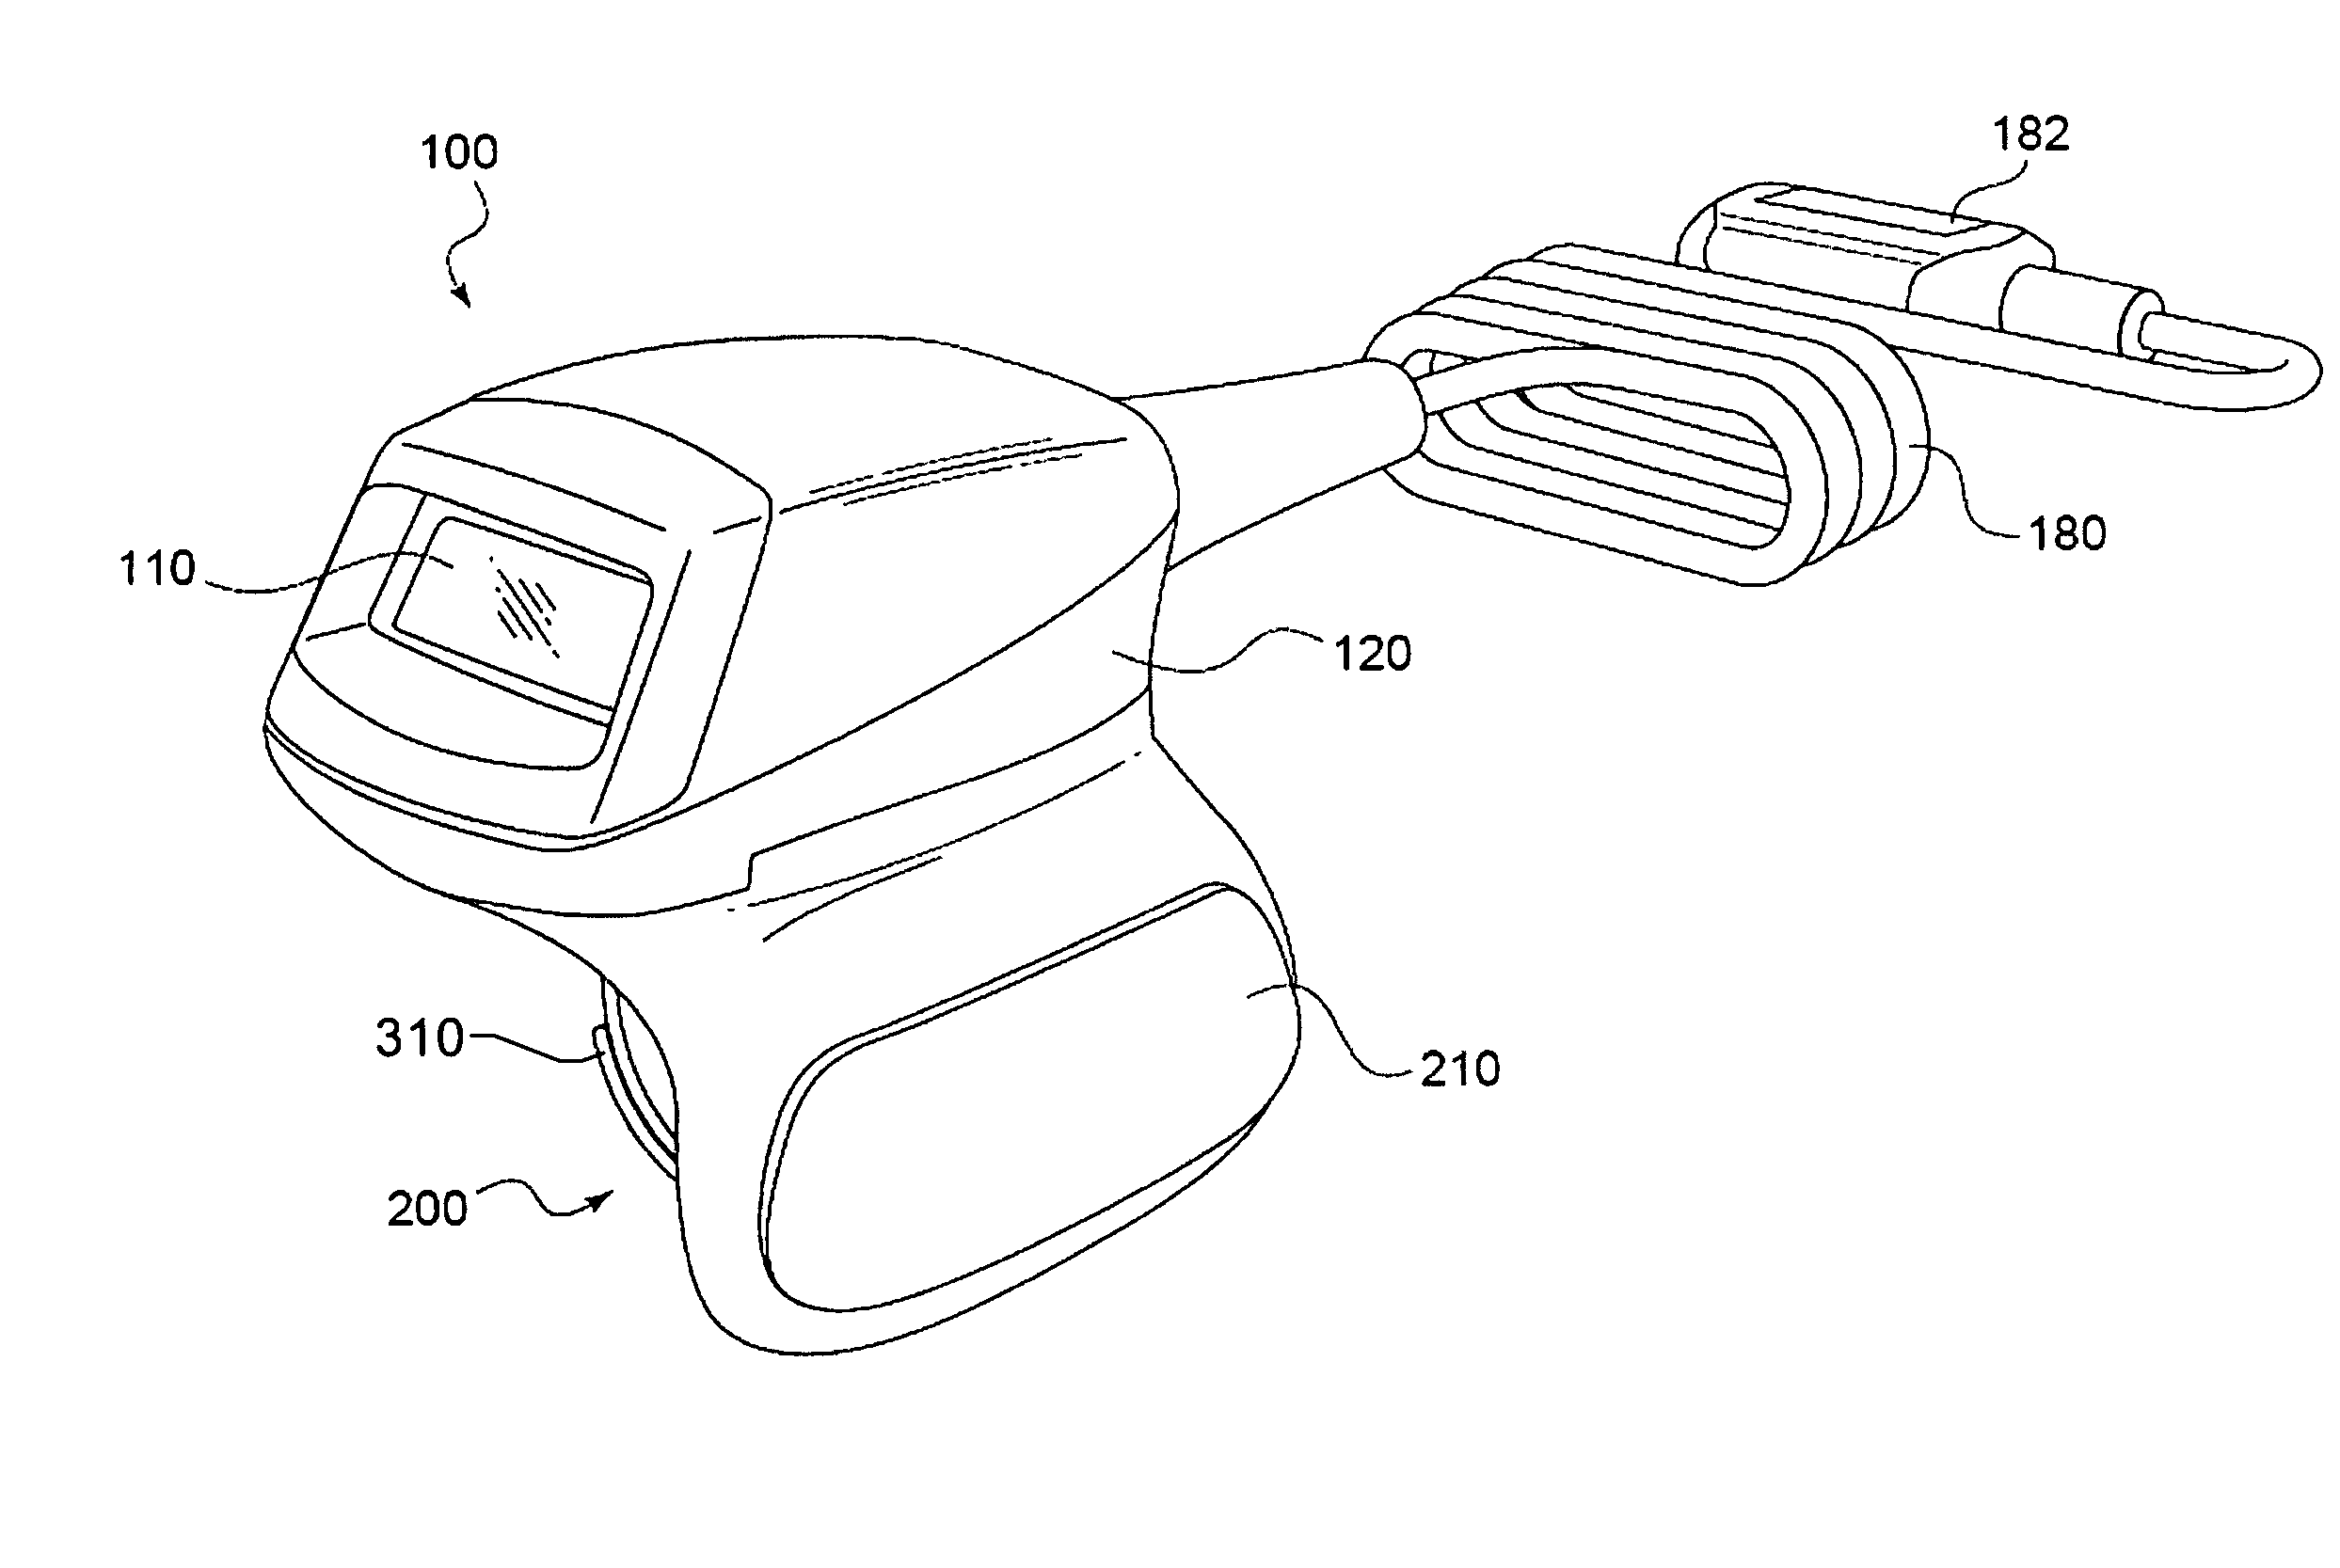 Wearable data acquisition device